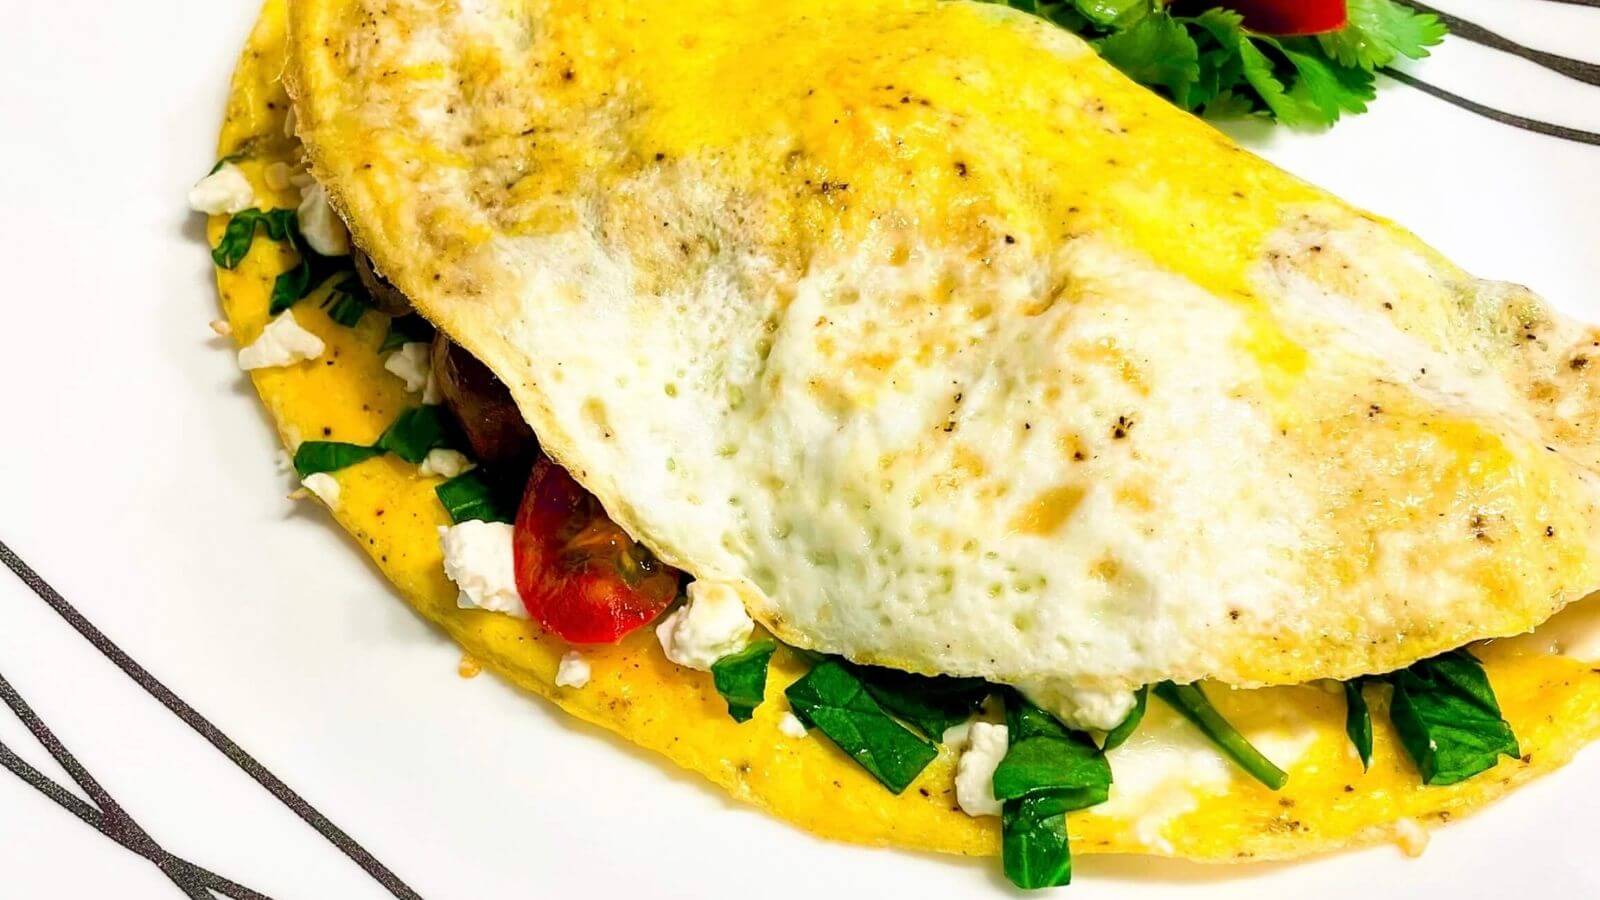 egg omelet filled with spinach, tomatoes, and feta cheese